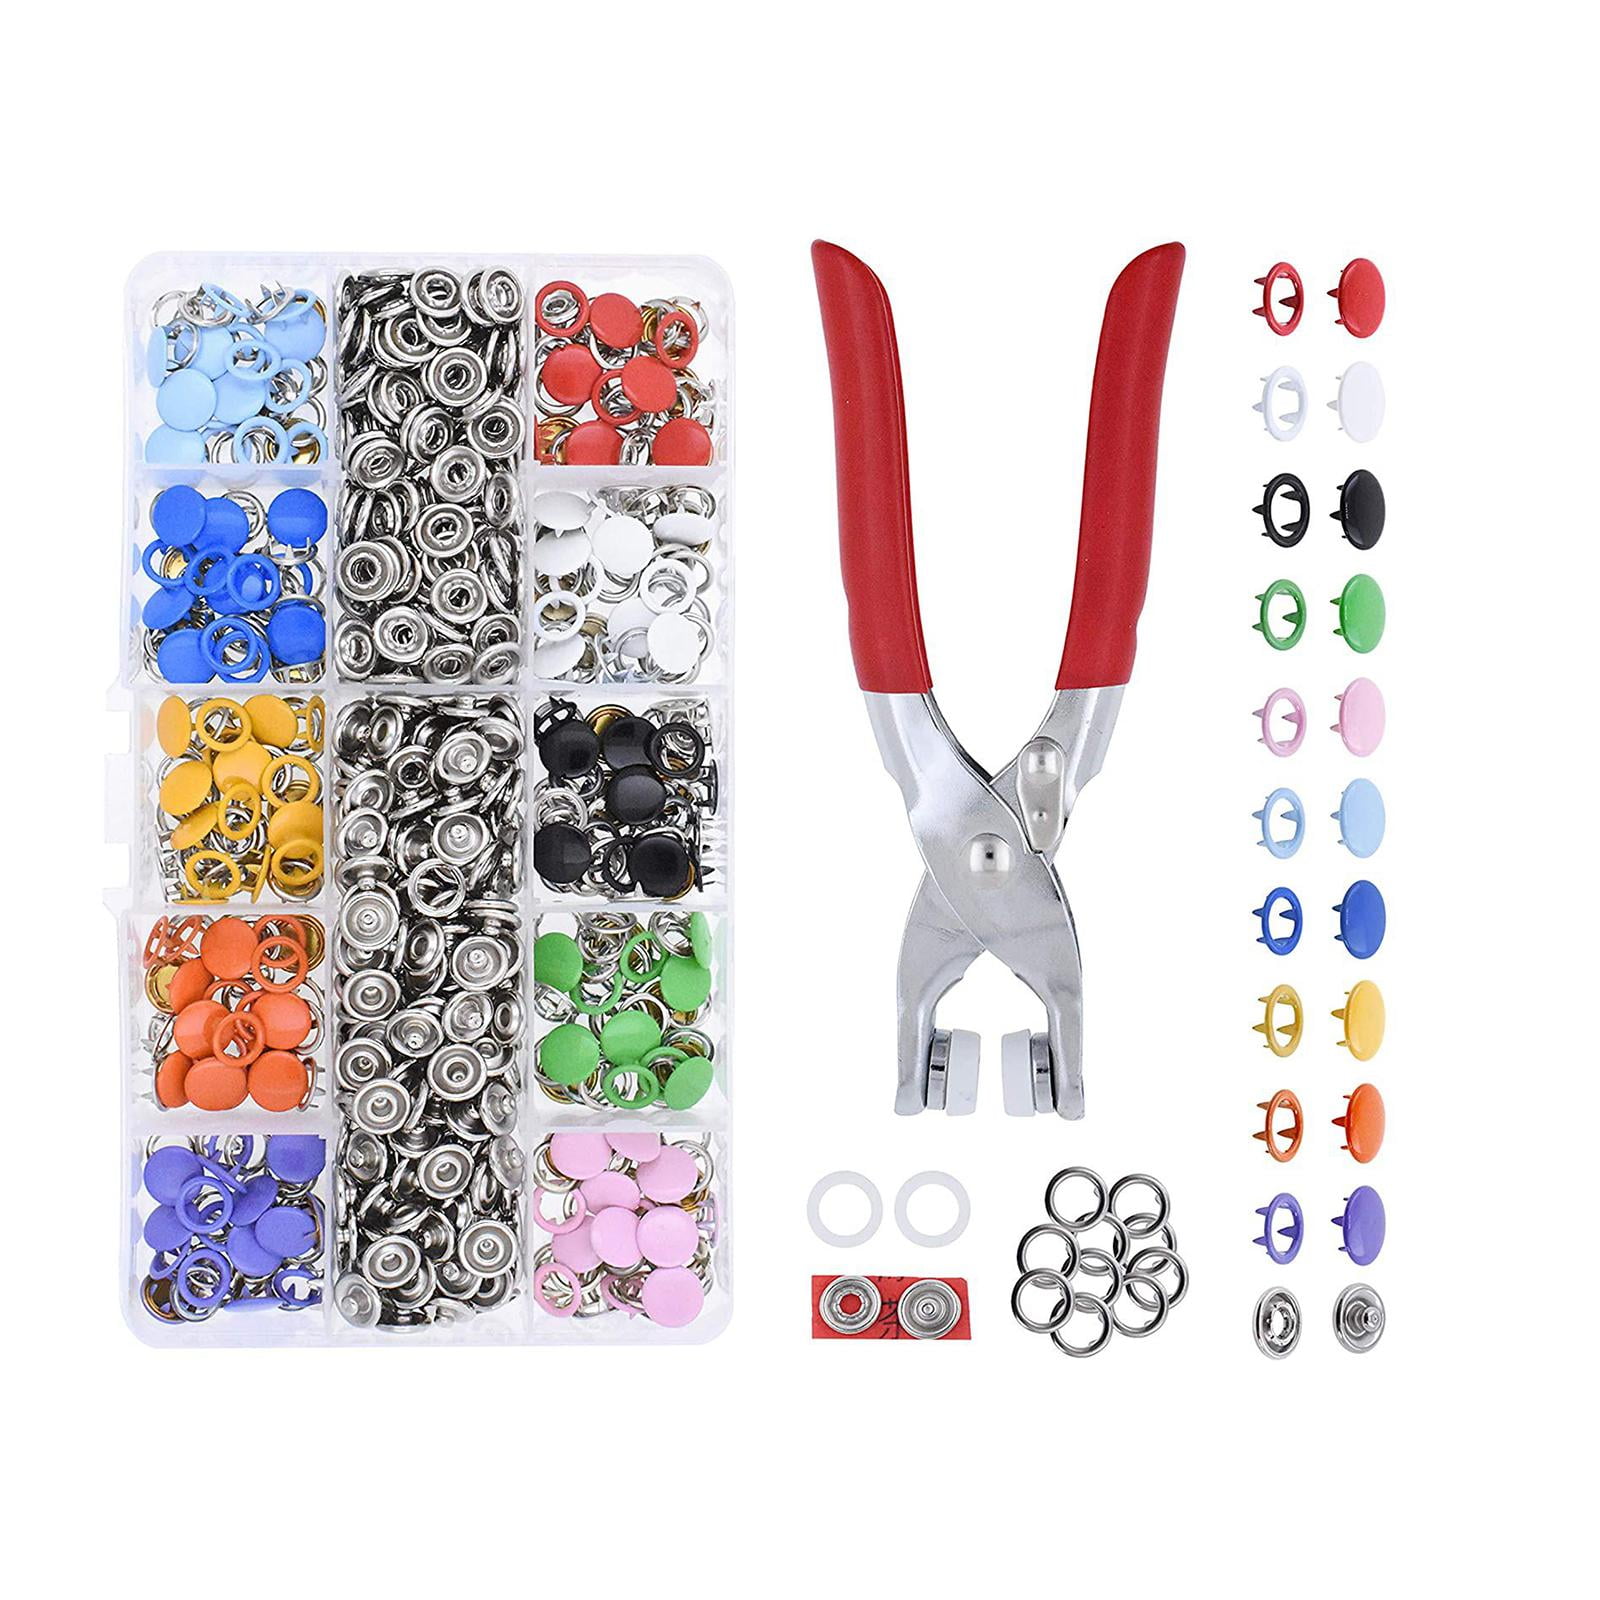 10 Colors Snap Fasteners 100 Hollow Snaps 100 Solid Snaps ,Metal Prong ...